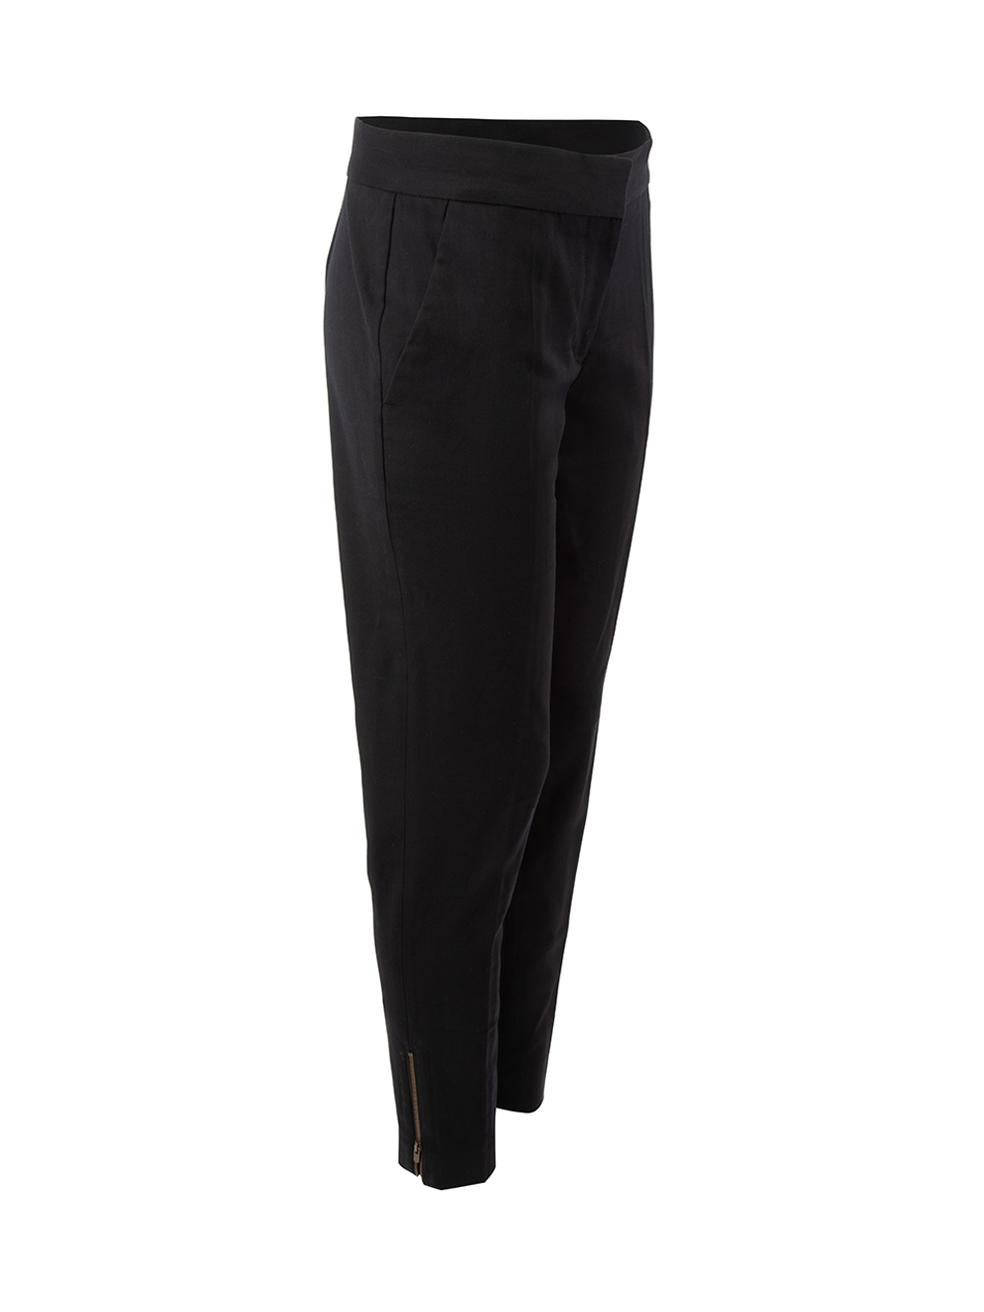 CONDITION is Very good. Hardly any visible wear to trousers is evident other than light tarnishing to hardware on zipper and clasps on this used Stella McCartney designer resale item. 
 
 Details
  Black
 Wool
 Slim fit trousers
 Ankle length
 Low